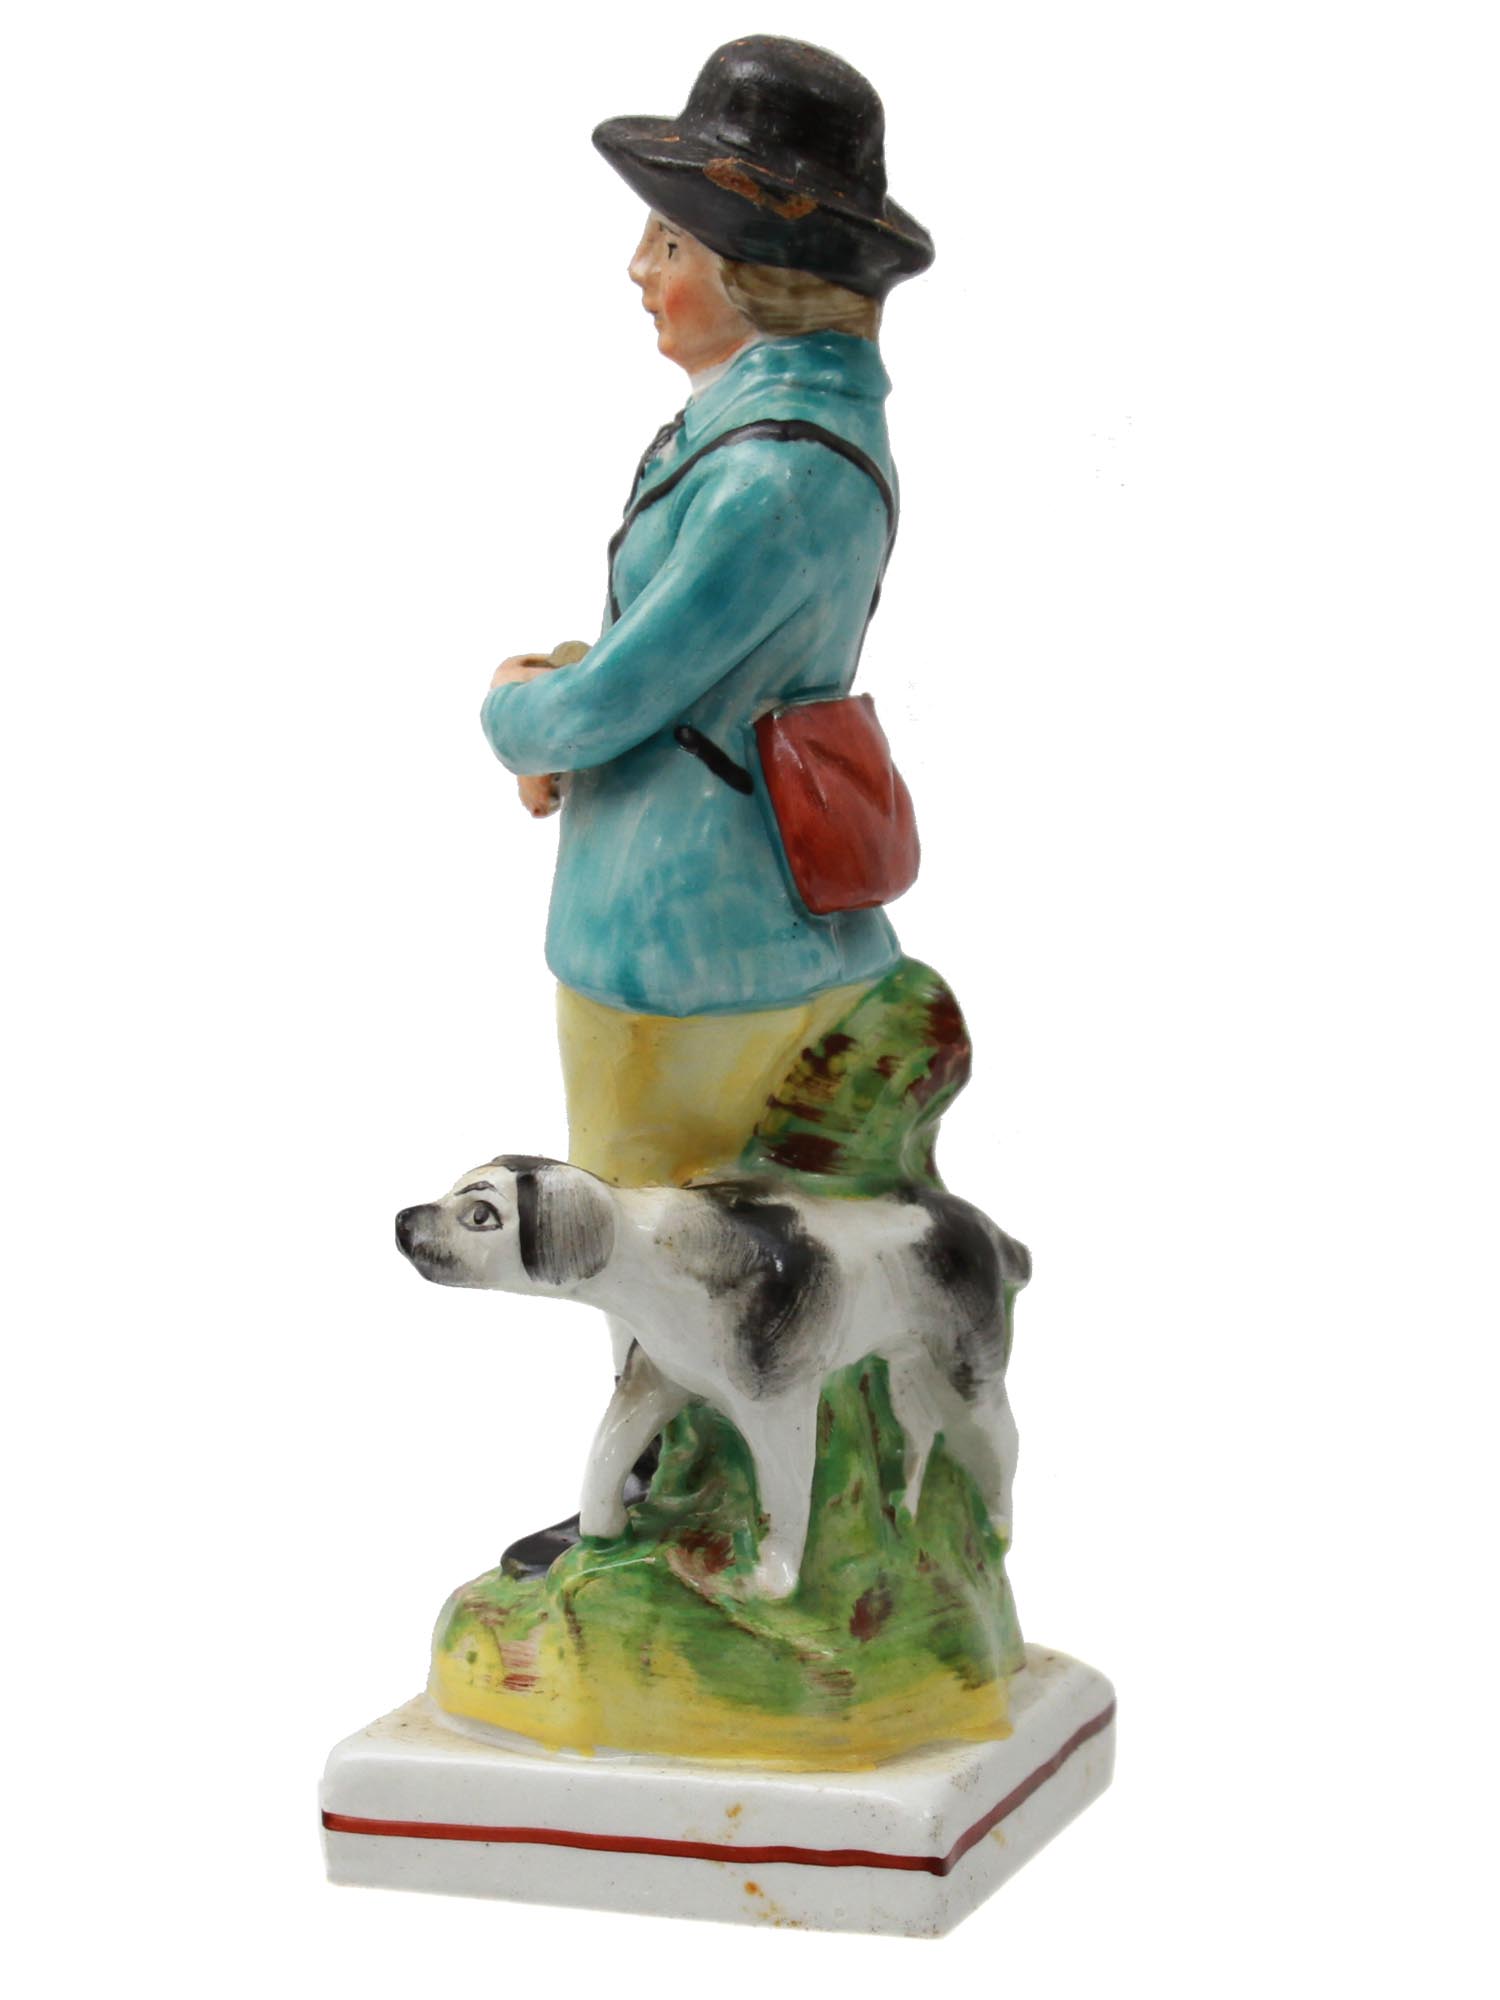 AN ANTIQUE ENGLISH PEARLWARE PORCELAIN FIGURINE PIC-2